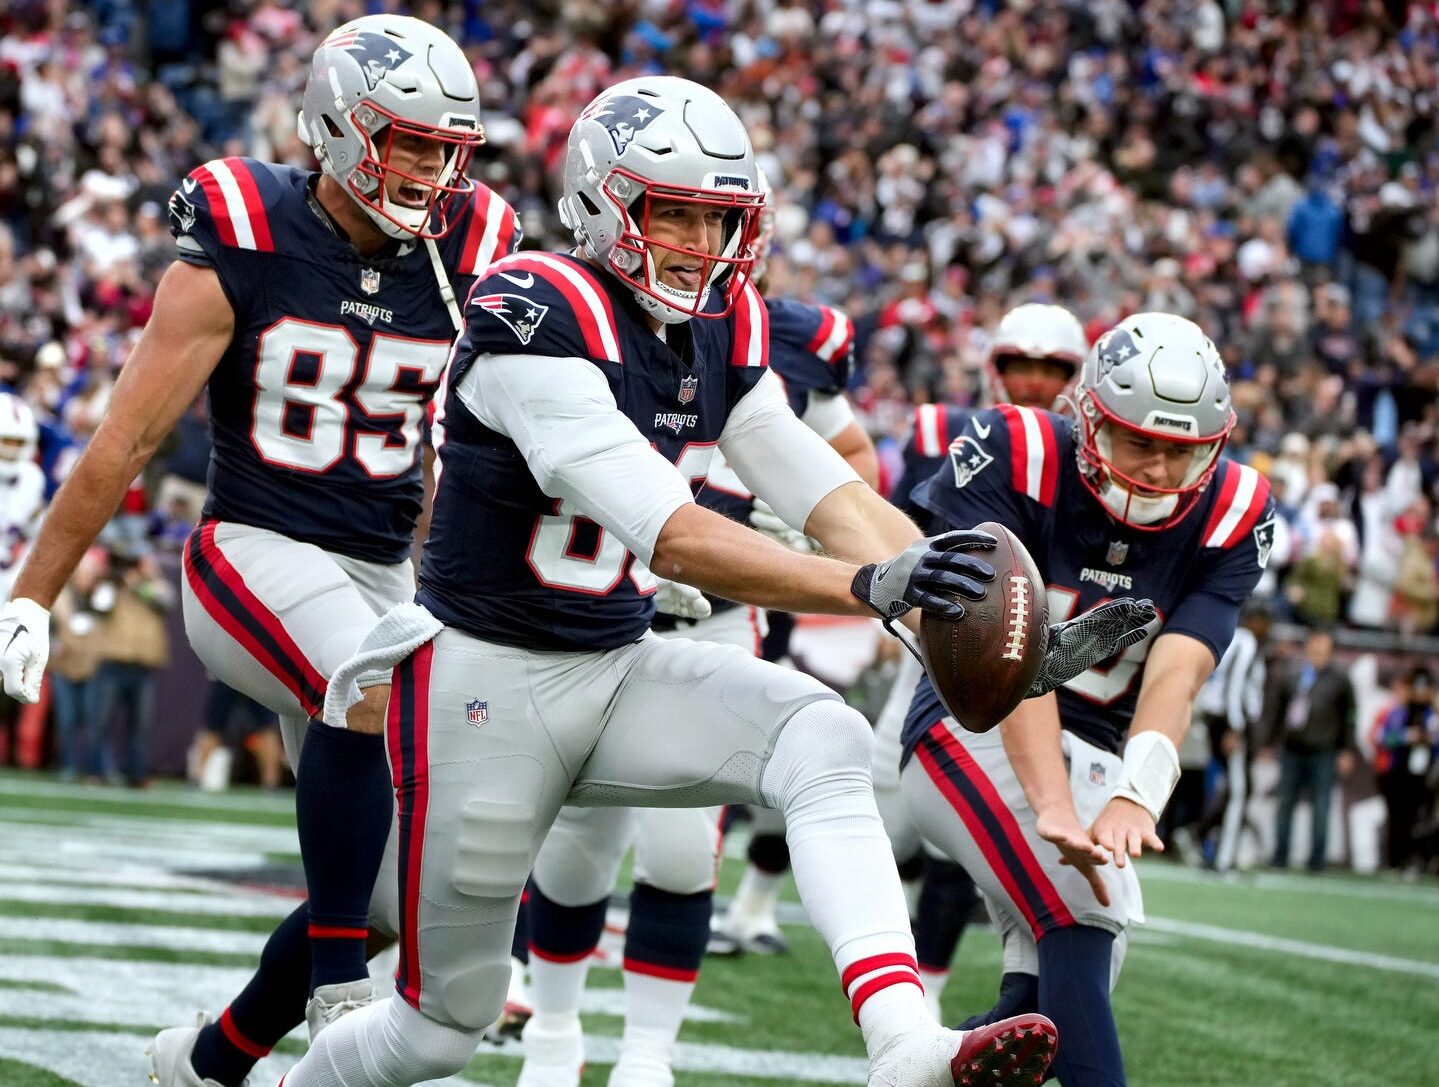 New England tight end Mike Gesicki celebrates his end zone reception with 12 seconds left to put the Patriots in the lead for their 29-25 win over Buffalo. (Kris Craig/USA Today Network)